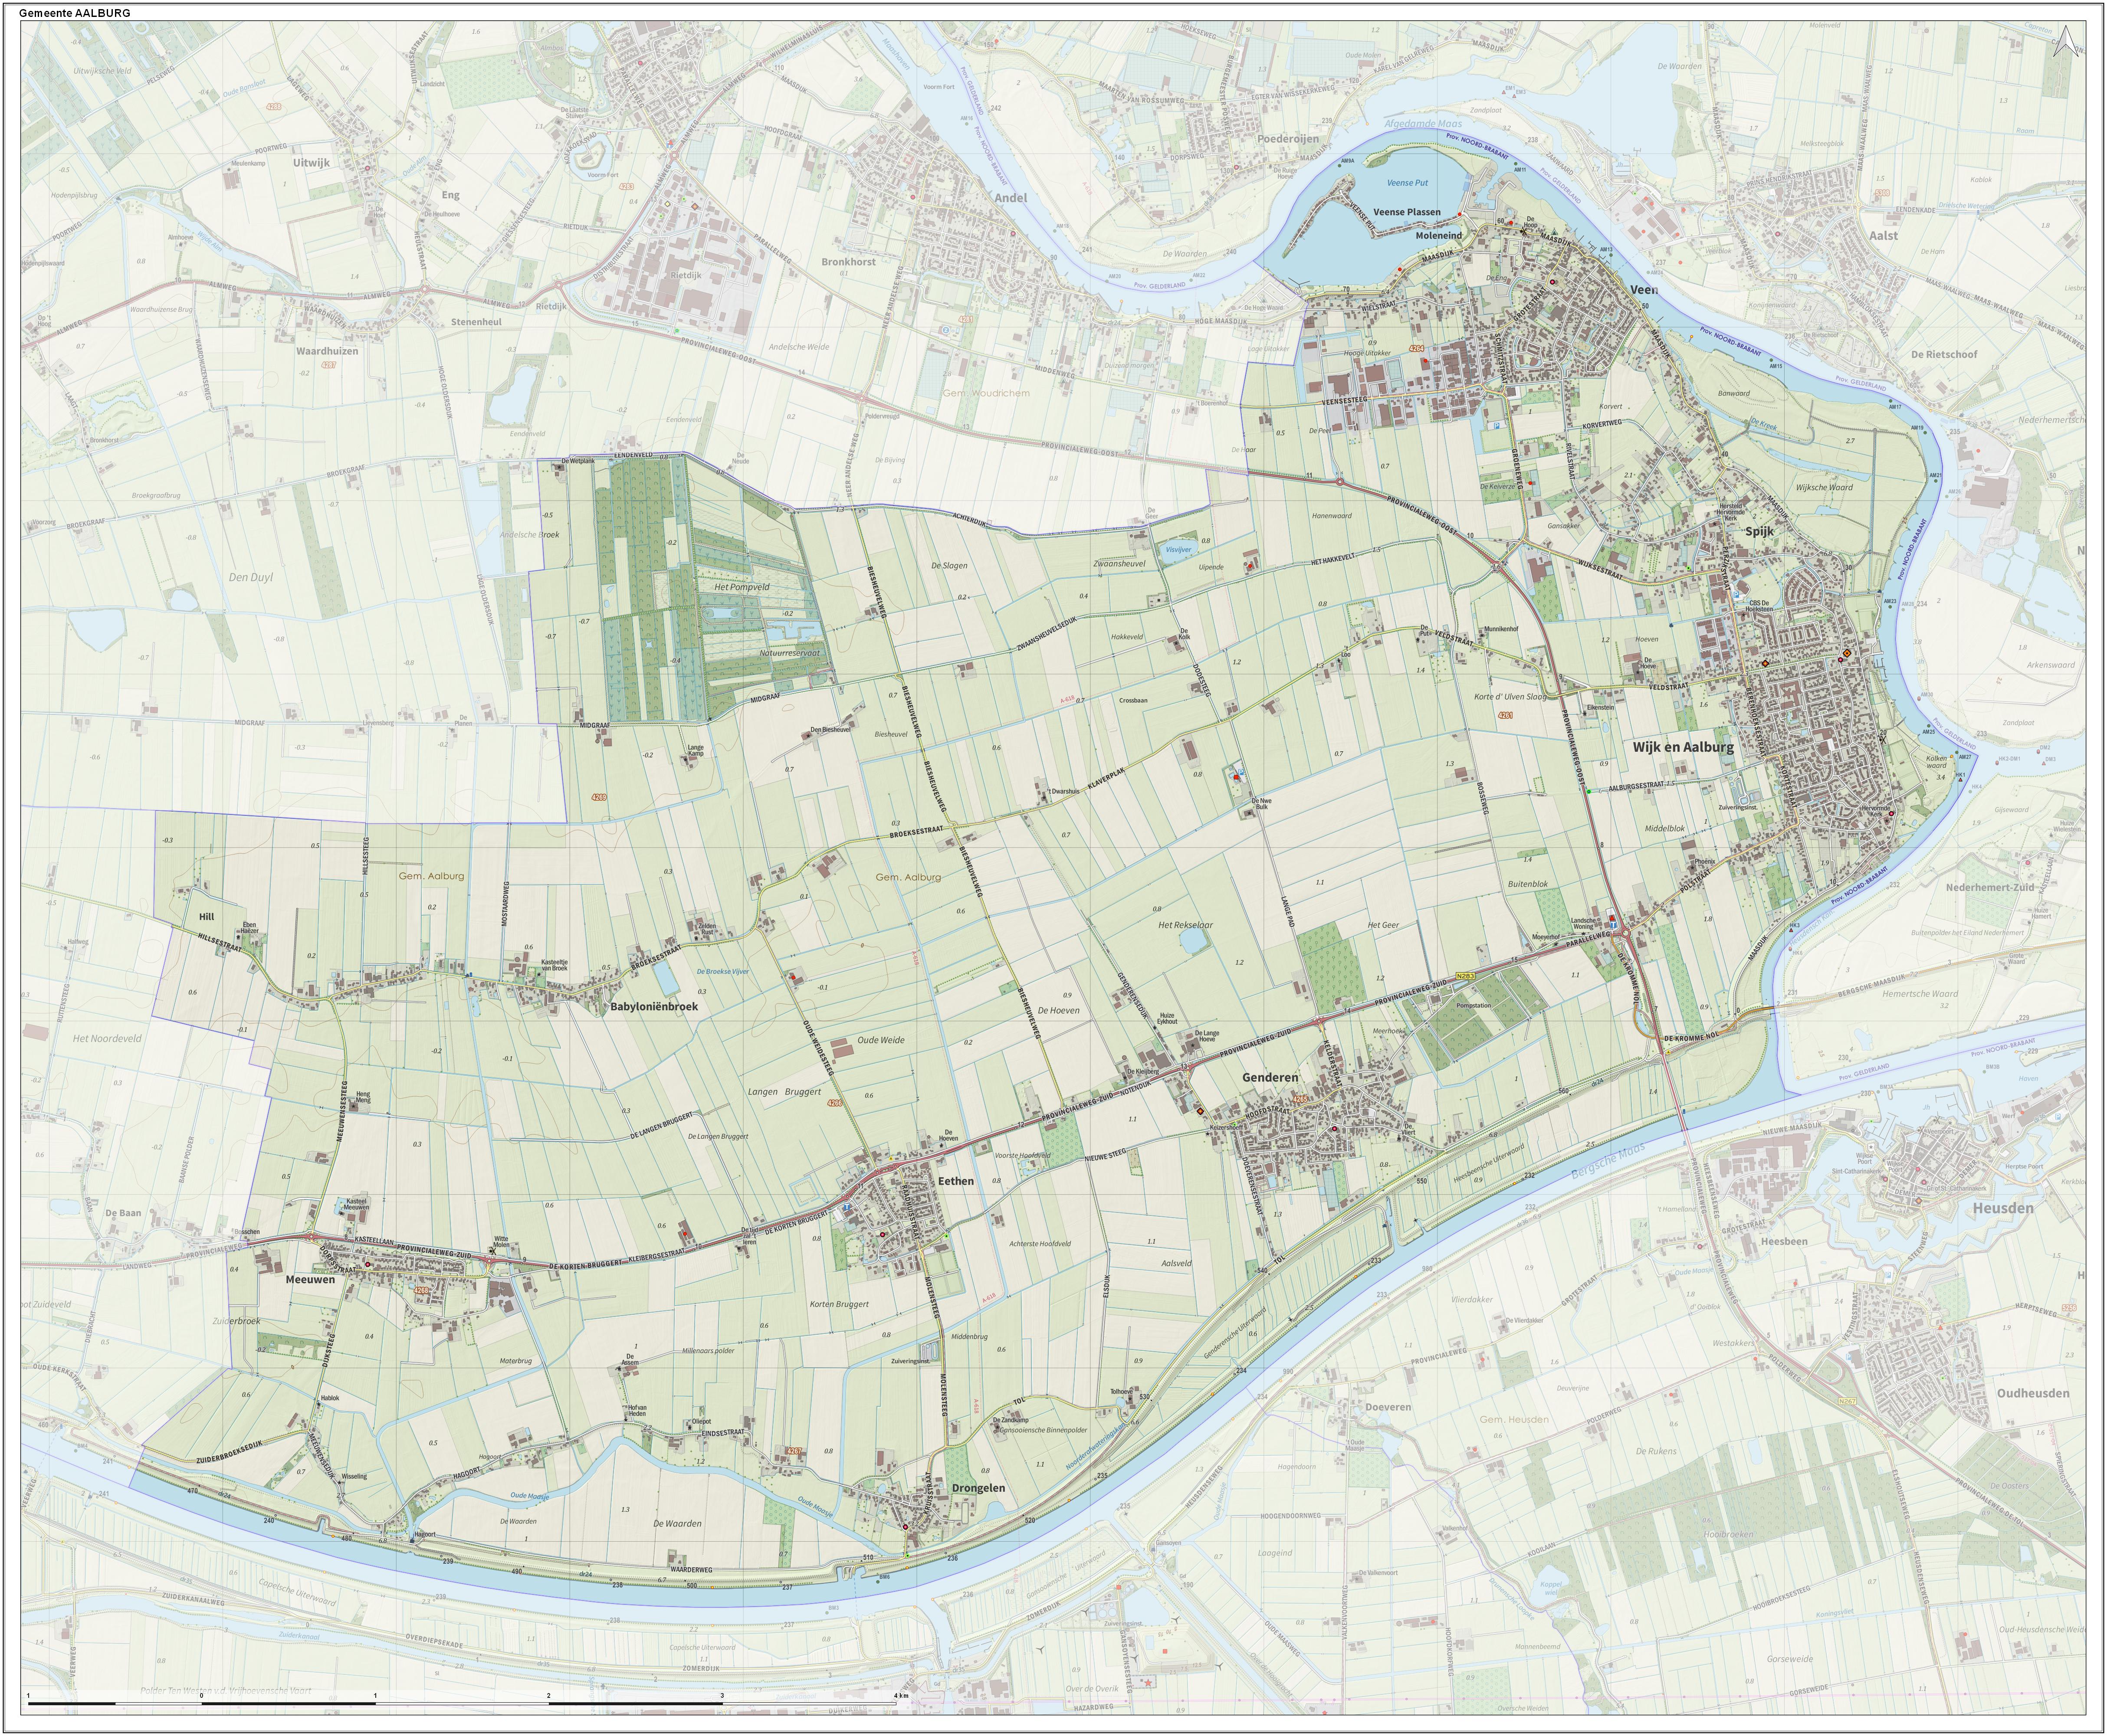 Topographic map of the municipality of Aalburg, June 2015